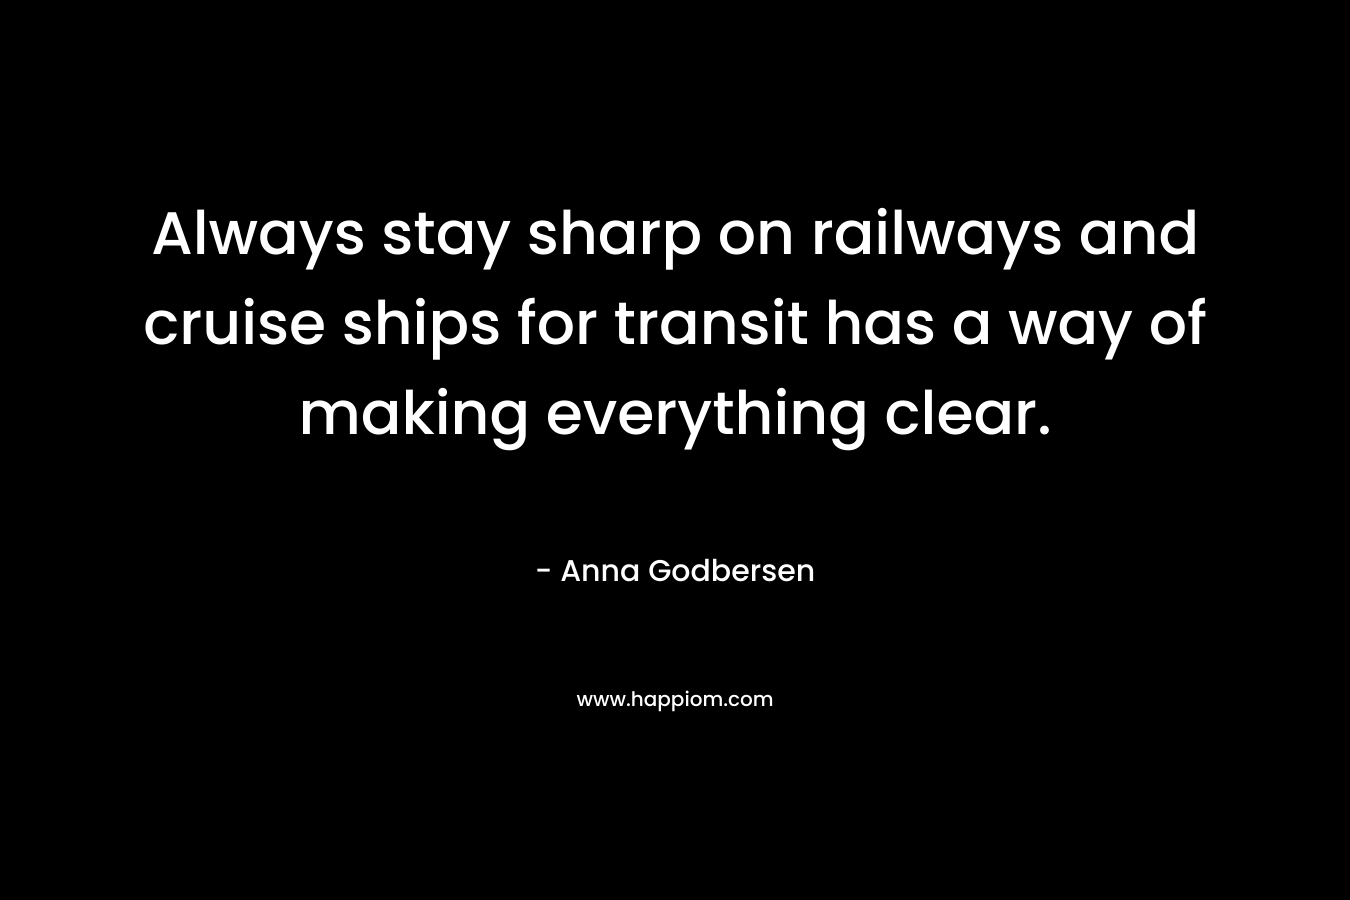 Always stay sharp on railways and cruise ships for transit has a way of making everything clear. – Anna Godbersen